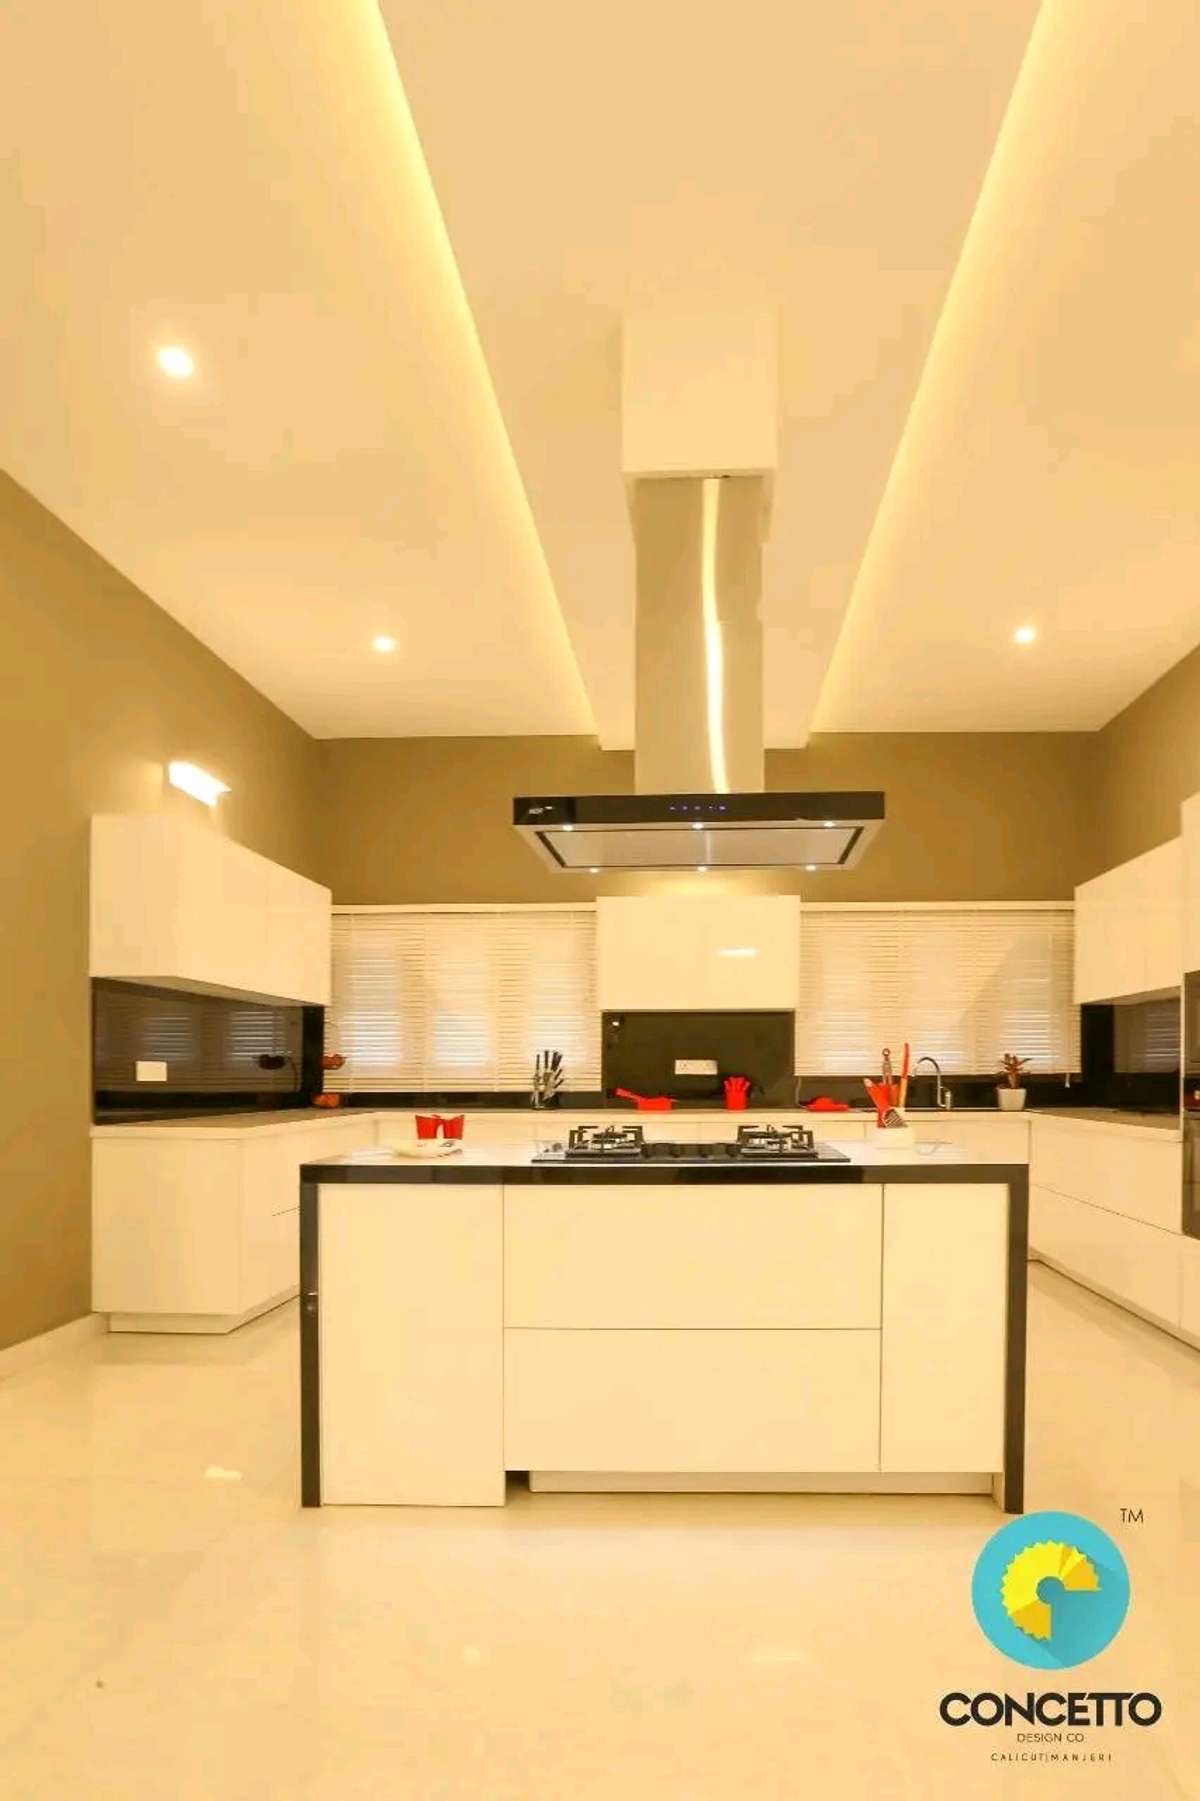 Ceiling, Lighting, Kitchen, Storage Designs by Architect Concetto Design Co, Kozhikode | Kolo